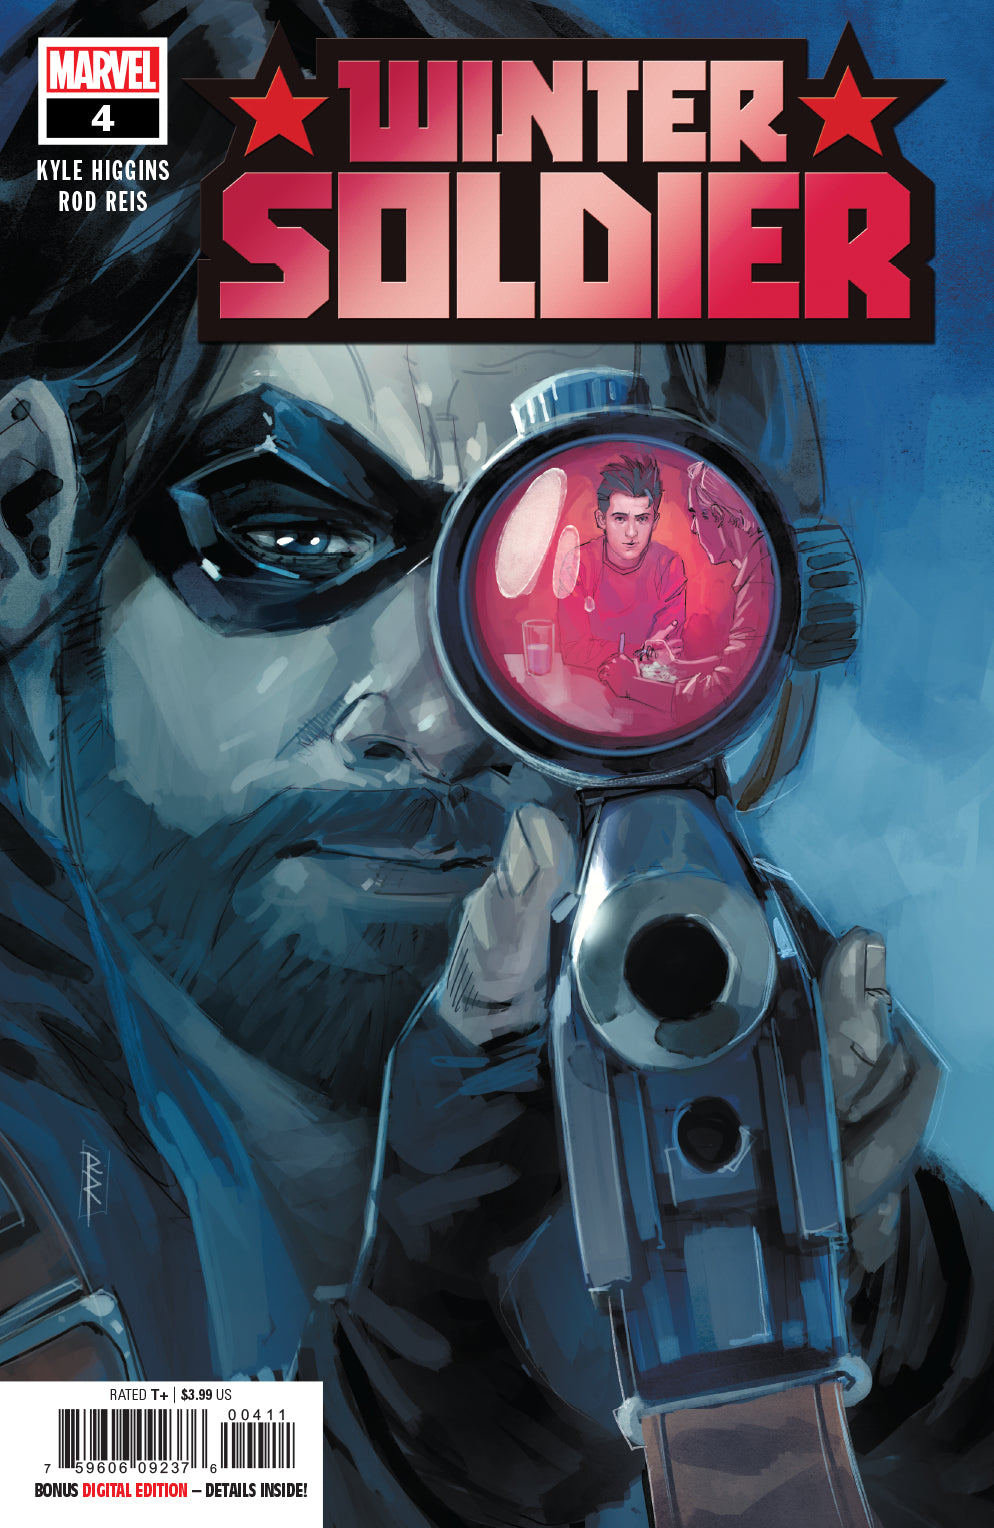 WINTER SOLDIER #4 (OF 5) COVER